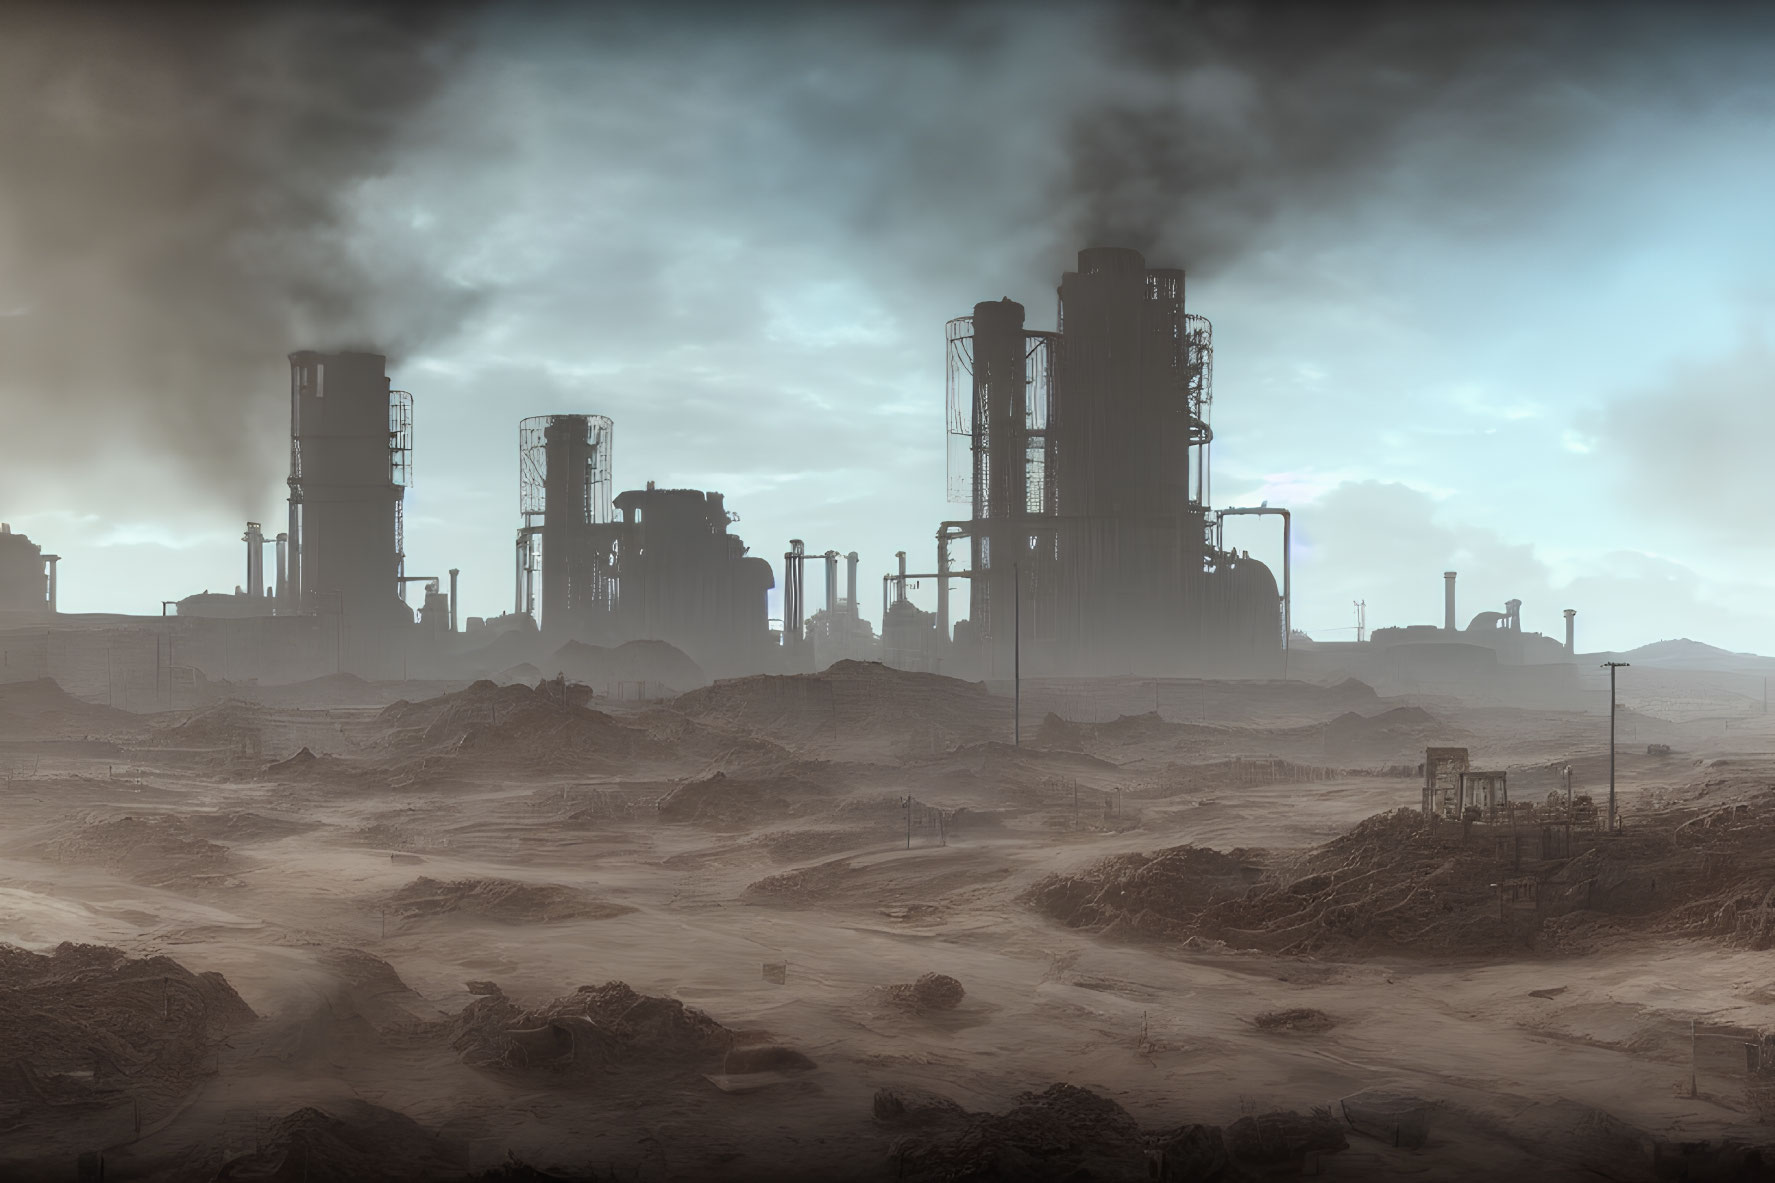 Dystopian industrial landscape with towering silos and smokestacks